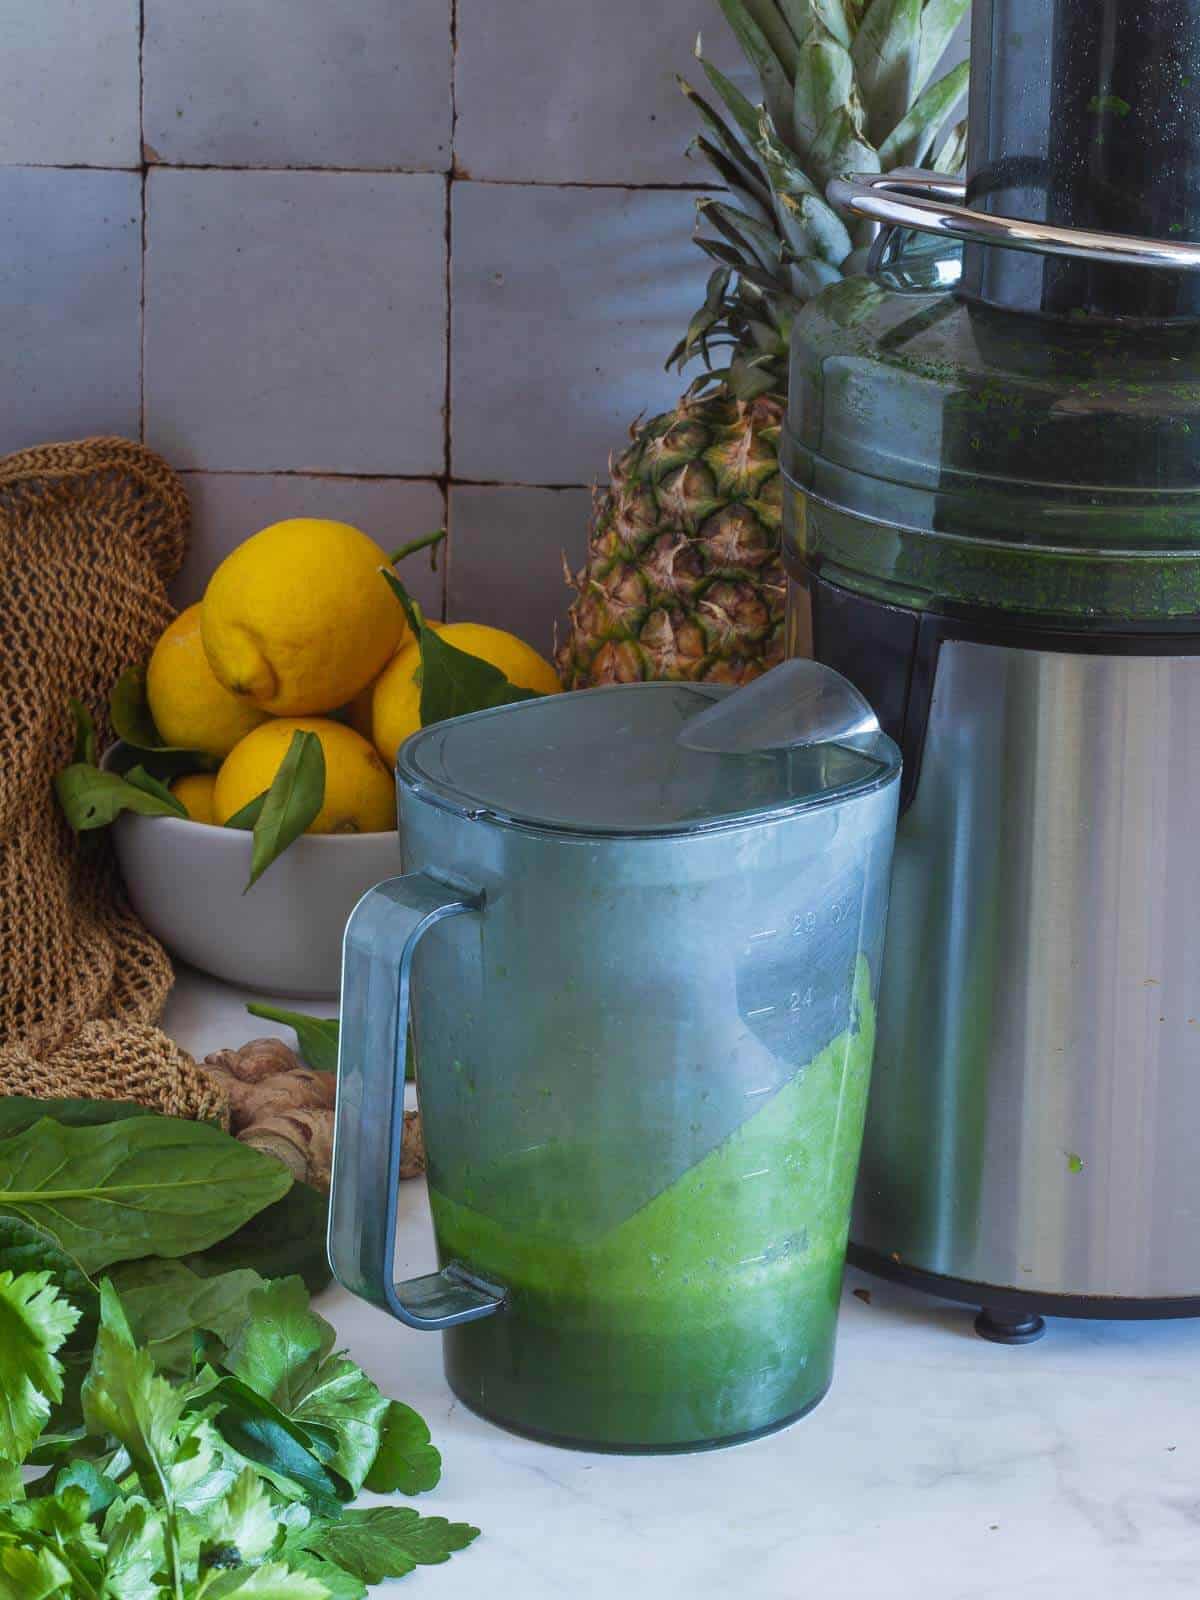 juicing all the ingredients using a slow juicer.